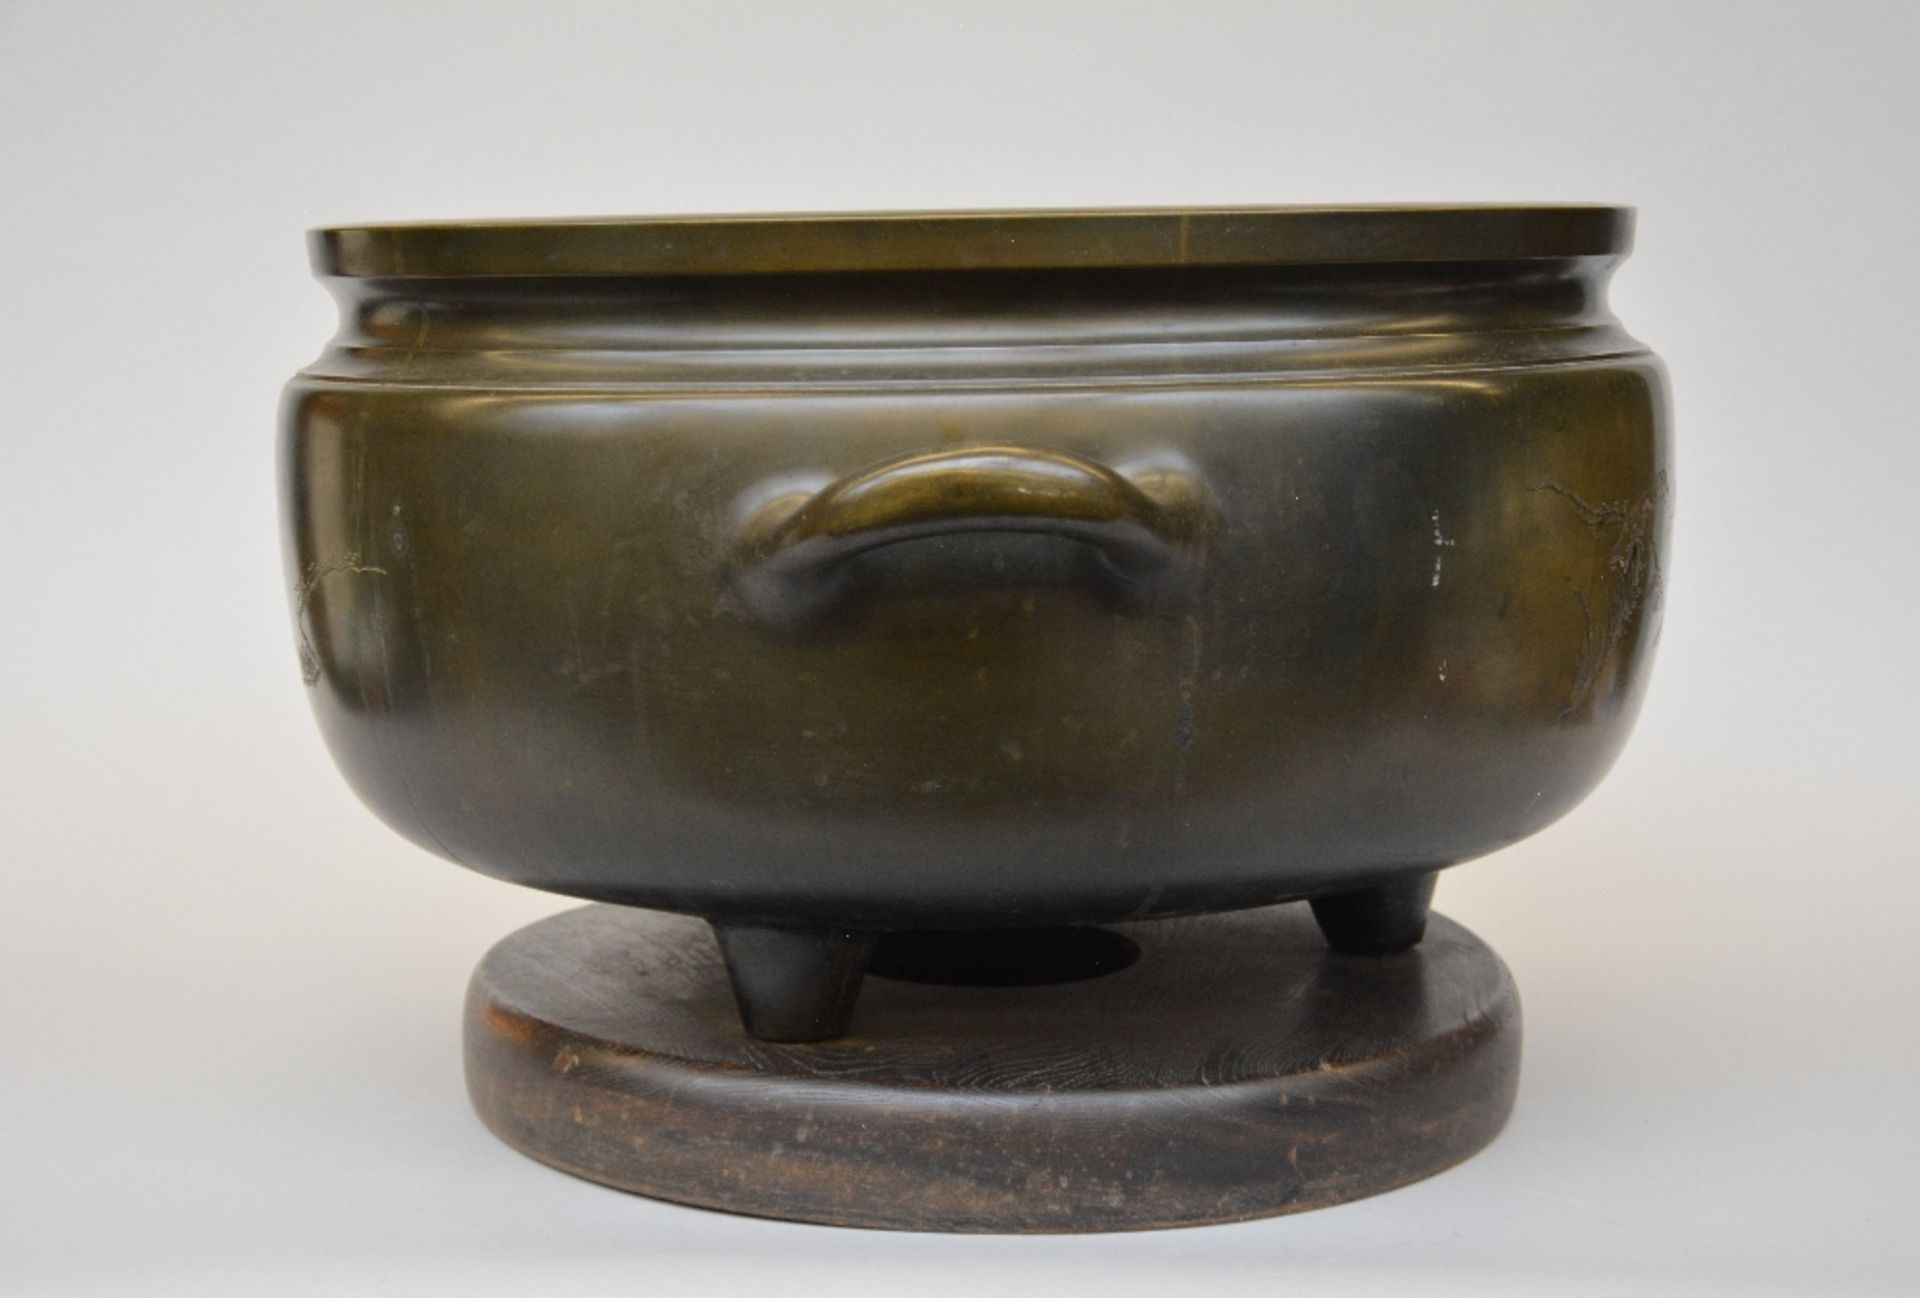 An exceptional Japanese bronze incense burner on a wooden base, late Edo period, H 36,5 - W 70 cm ( - Image 4 of 8